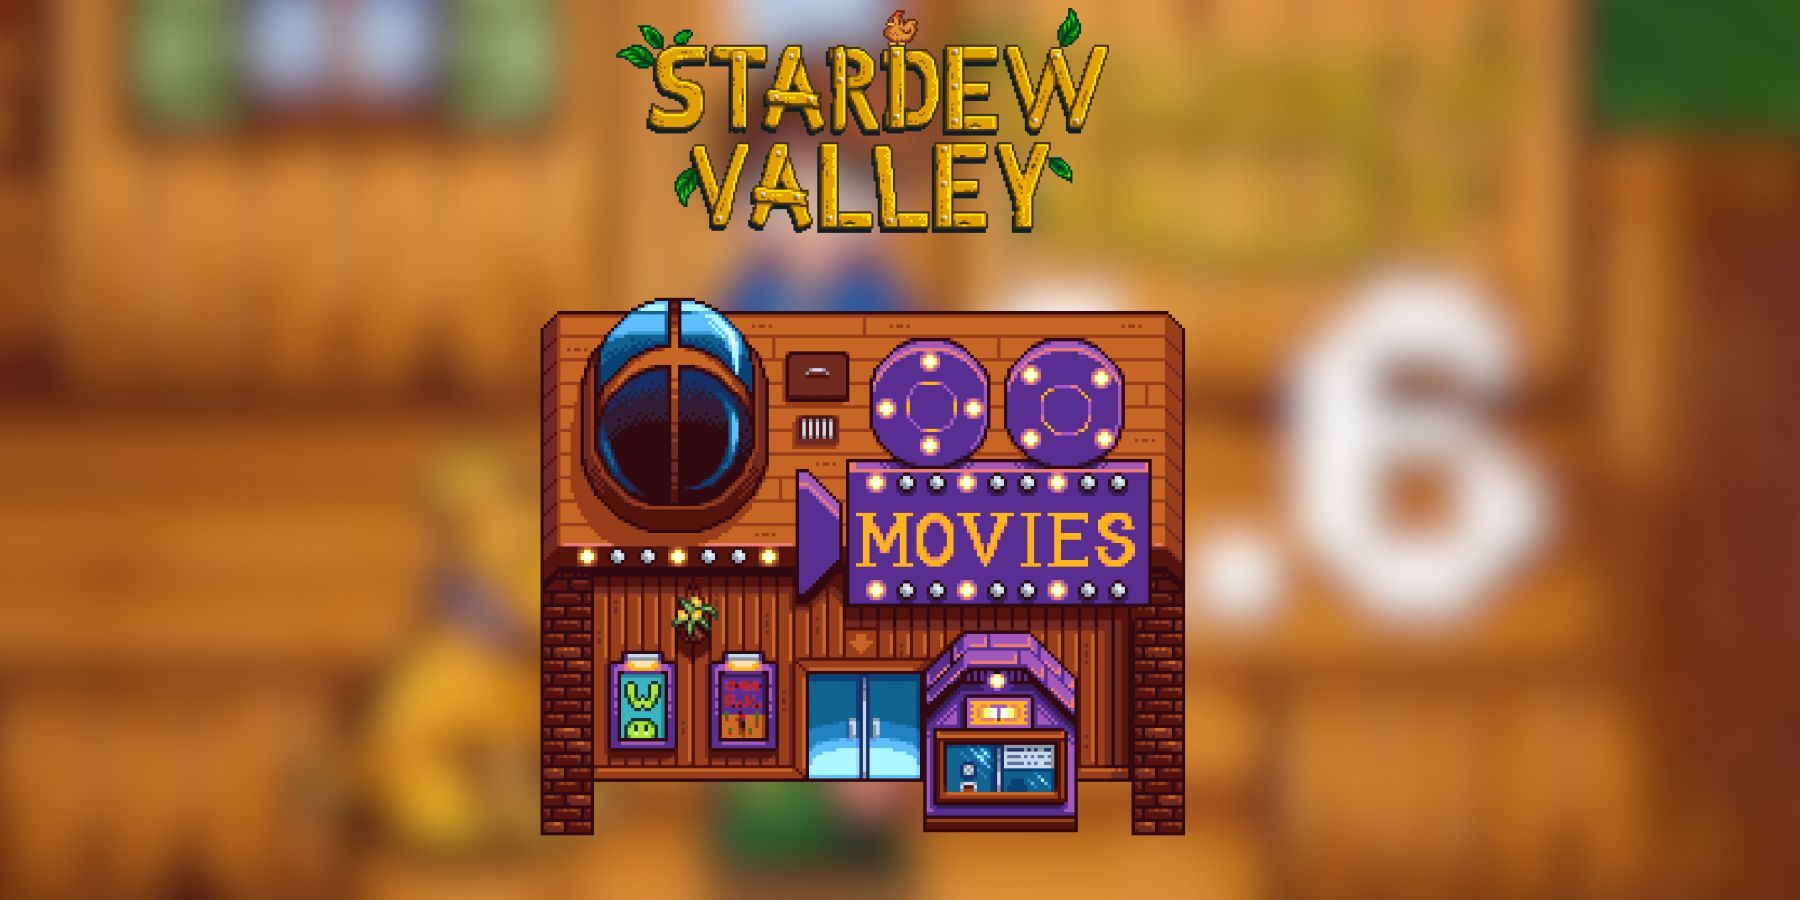 the movie theater in stardew valley.